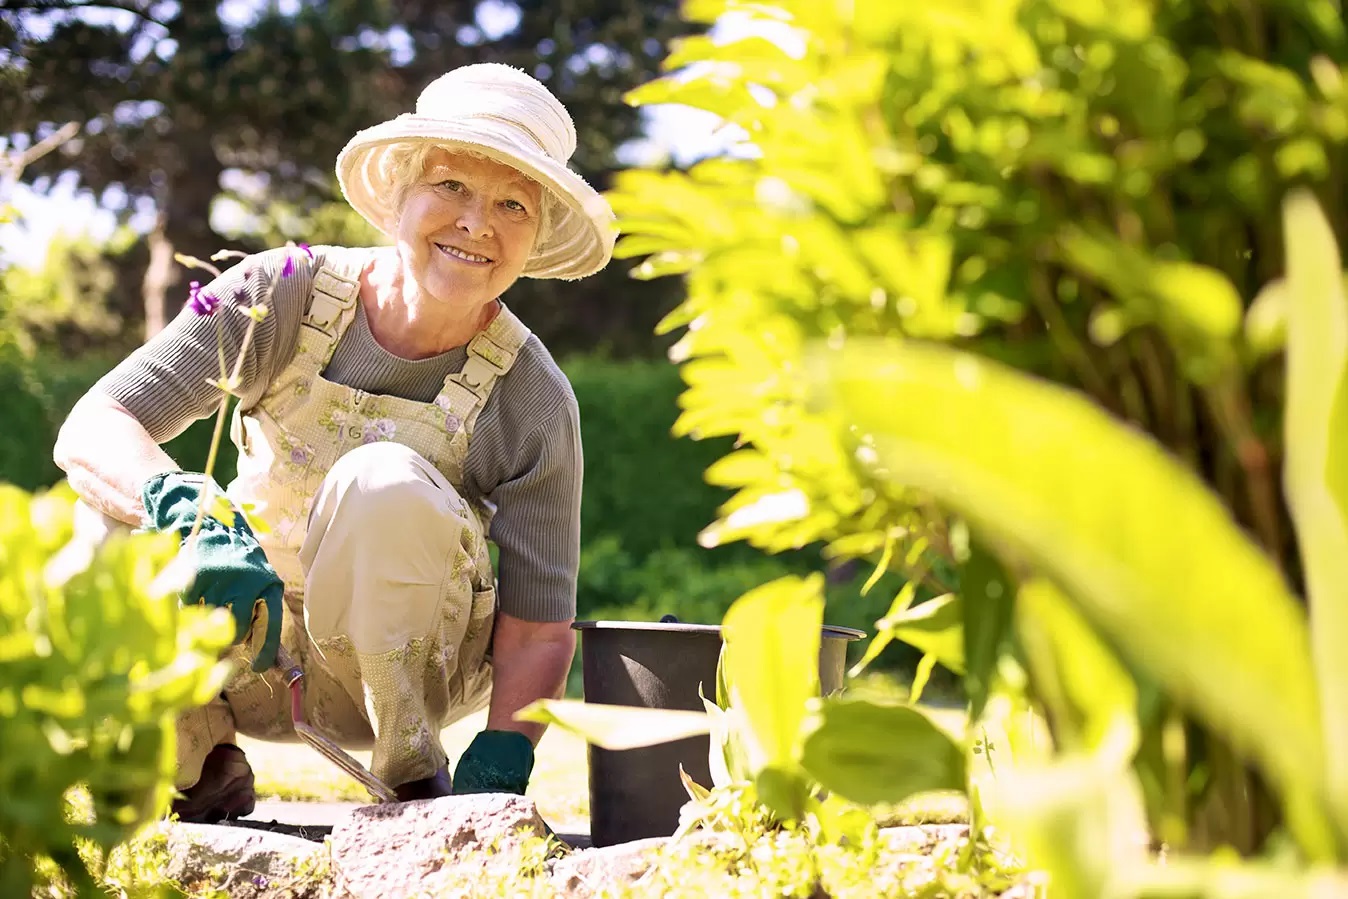 A woman is working happily in her garden. It's sunny, she's wearing a hat and she's smiling.